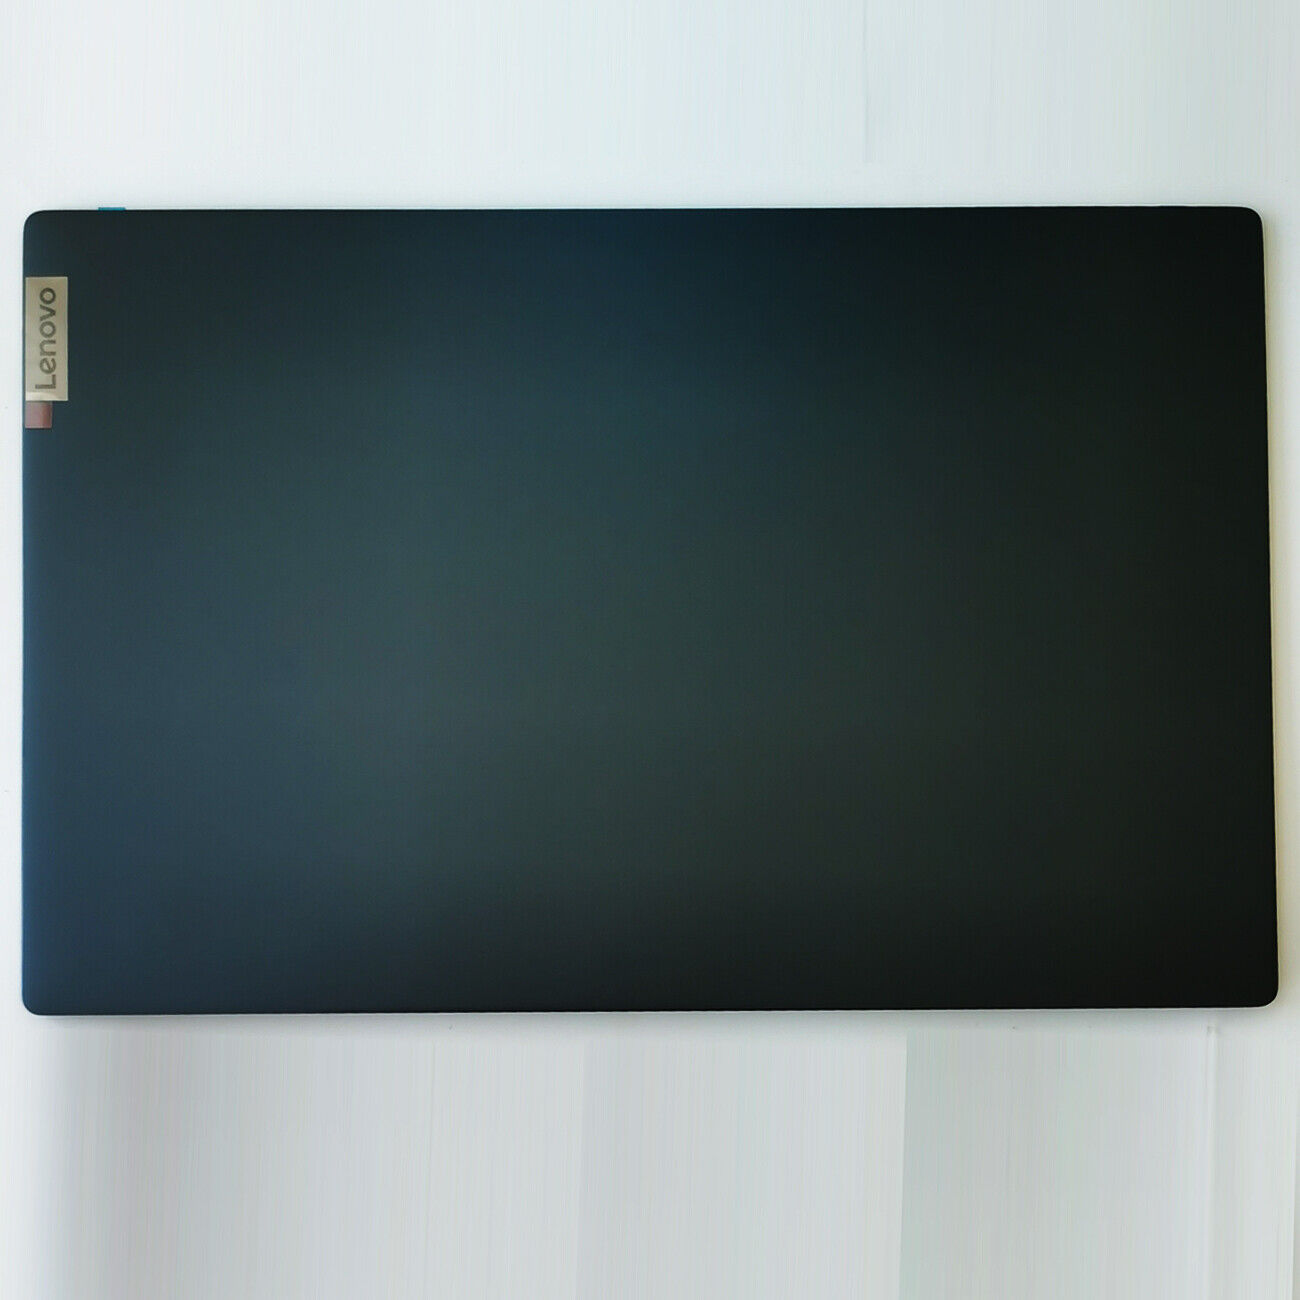 For Lenovo ideapad 5 15ITL05 15ARE05 15IIL05 15ALC05 LCD Back Cover/Bezel/Hinge